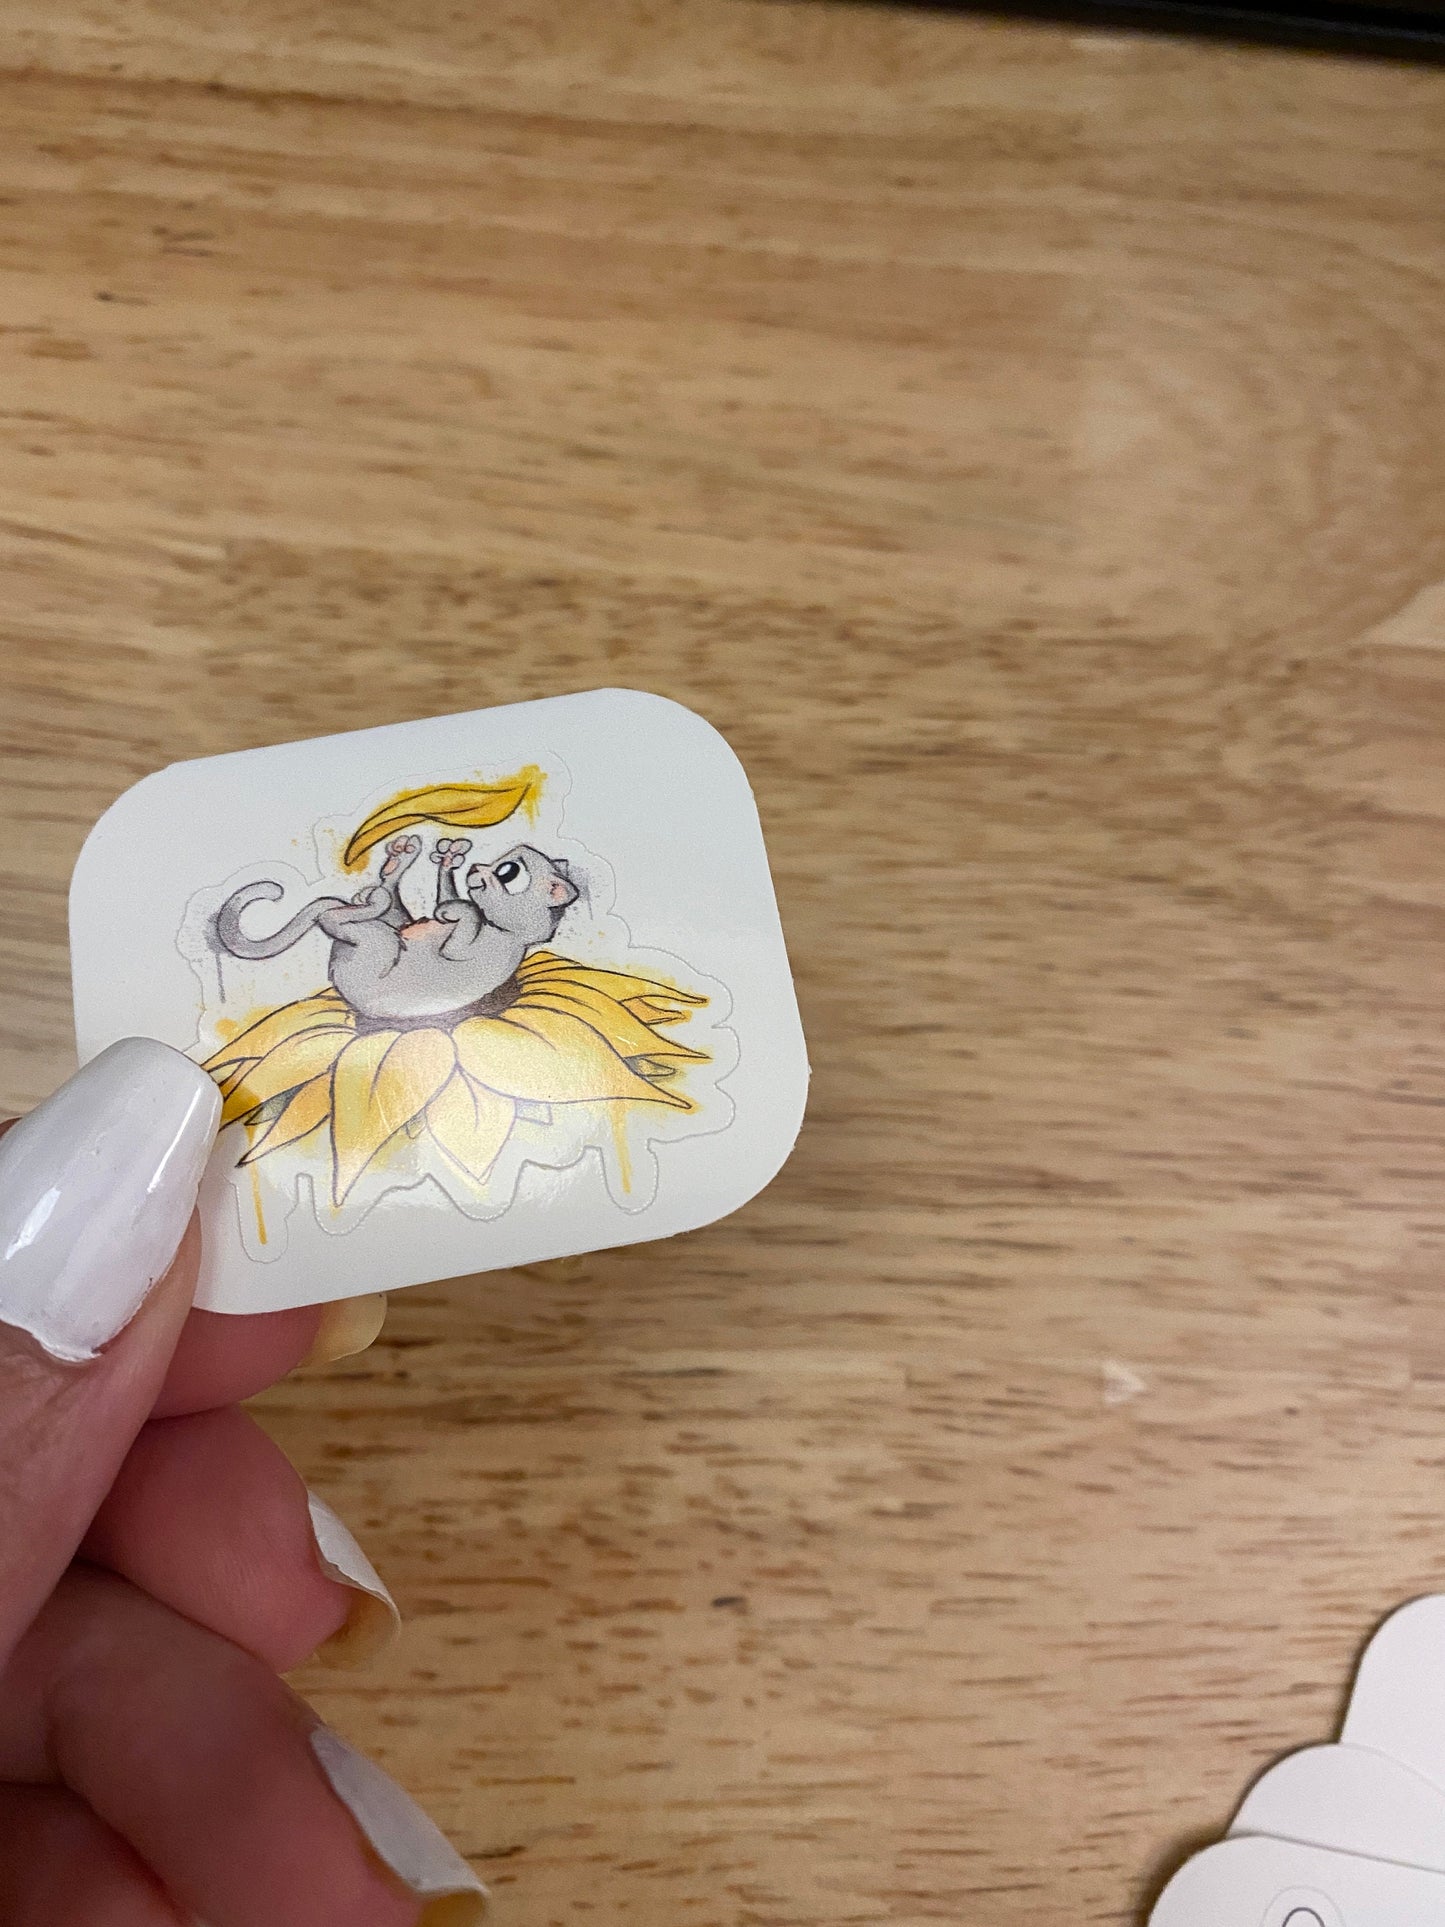 Kitty playing with Sunflower Sticker, Grey Cat with sunflower Sticker,  Cat sticker, Cute Cat Sticker, Cat playing